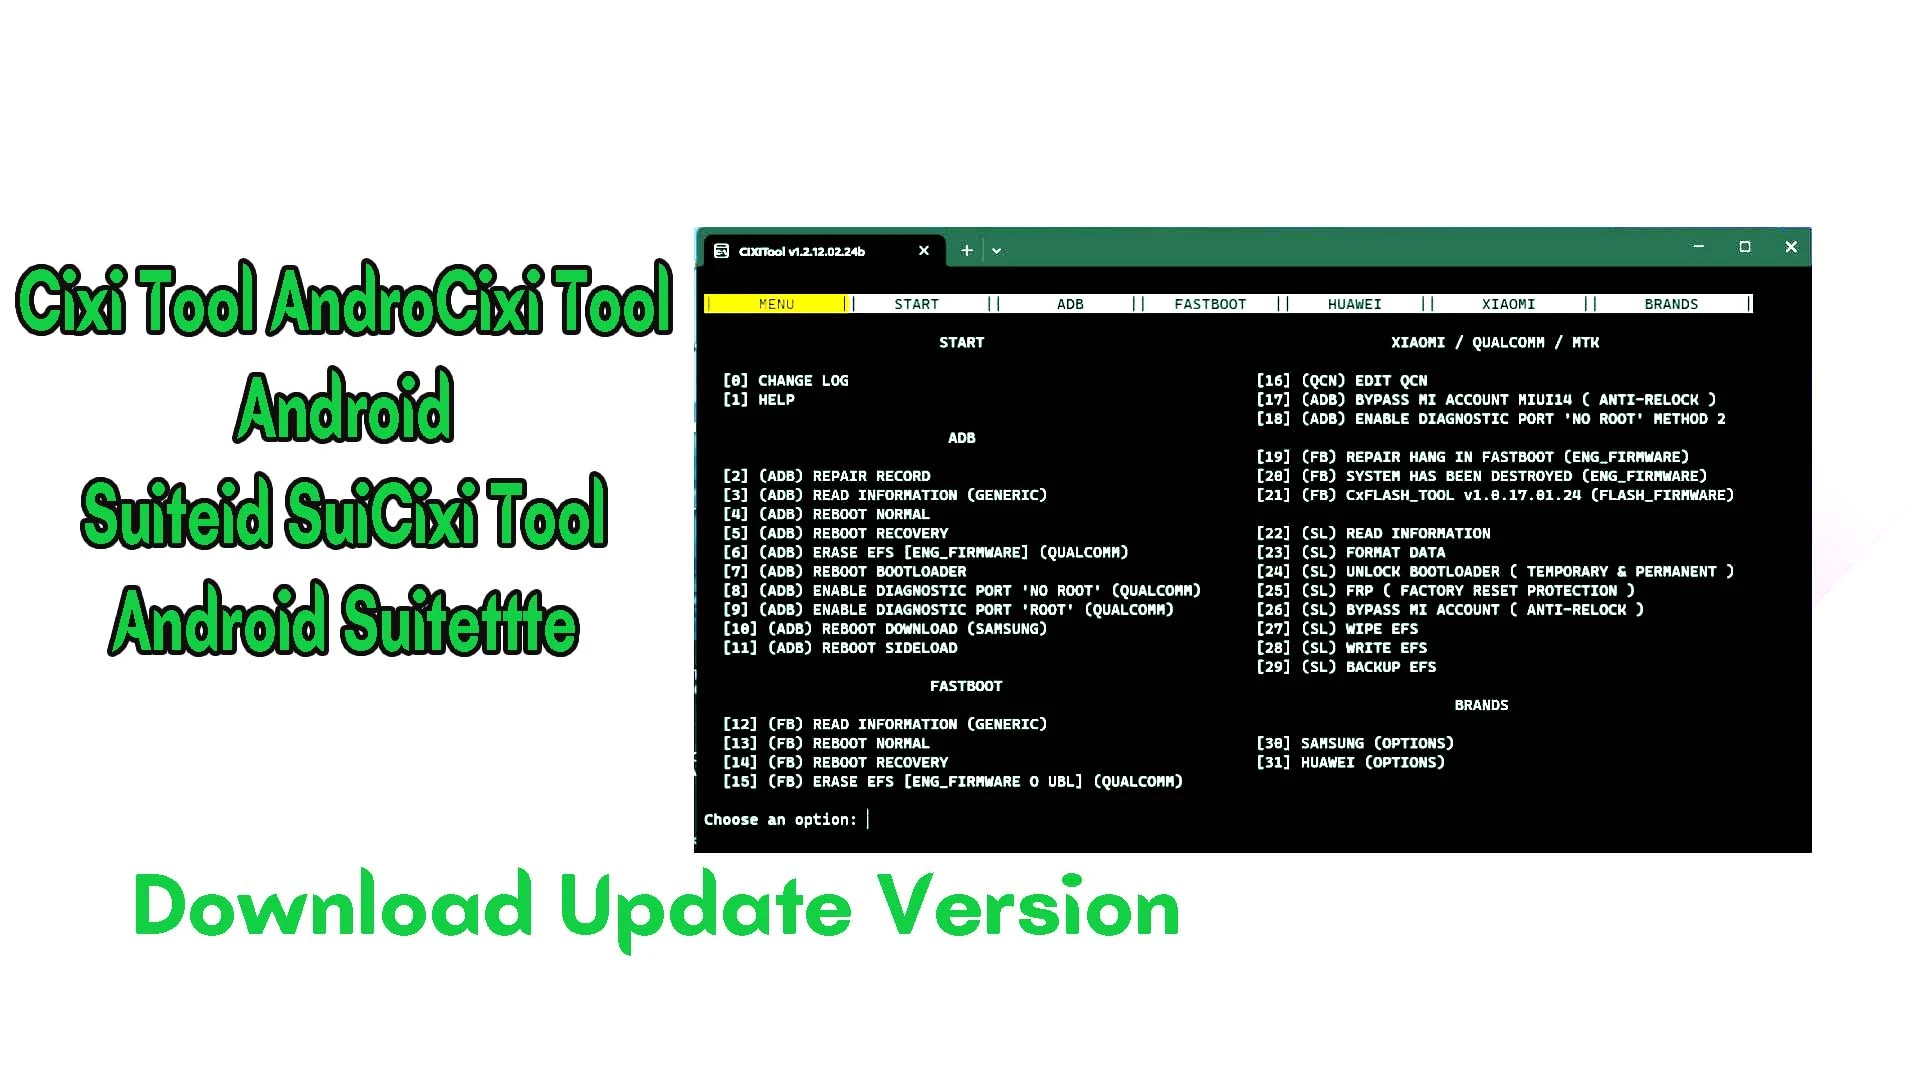 Free Download Cixi Tool Android Suite All Update Version